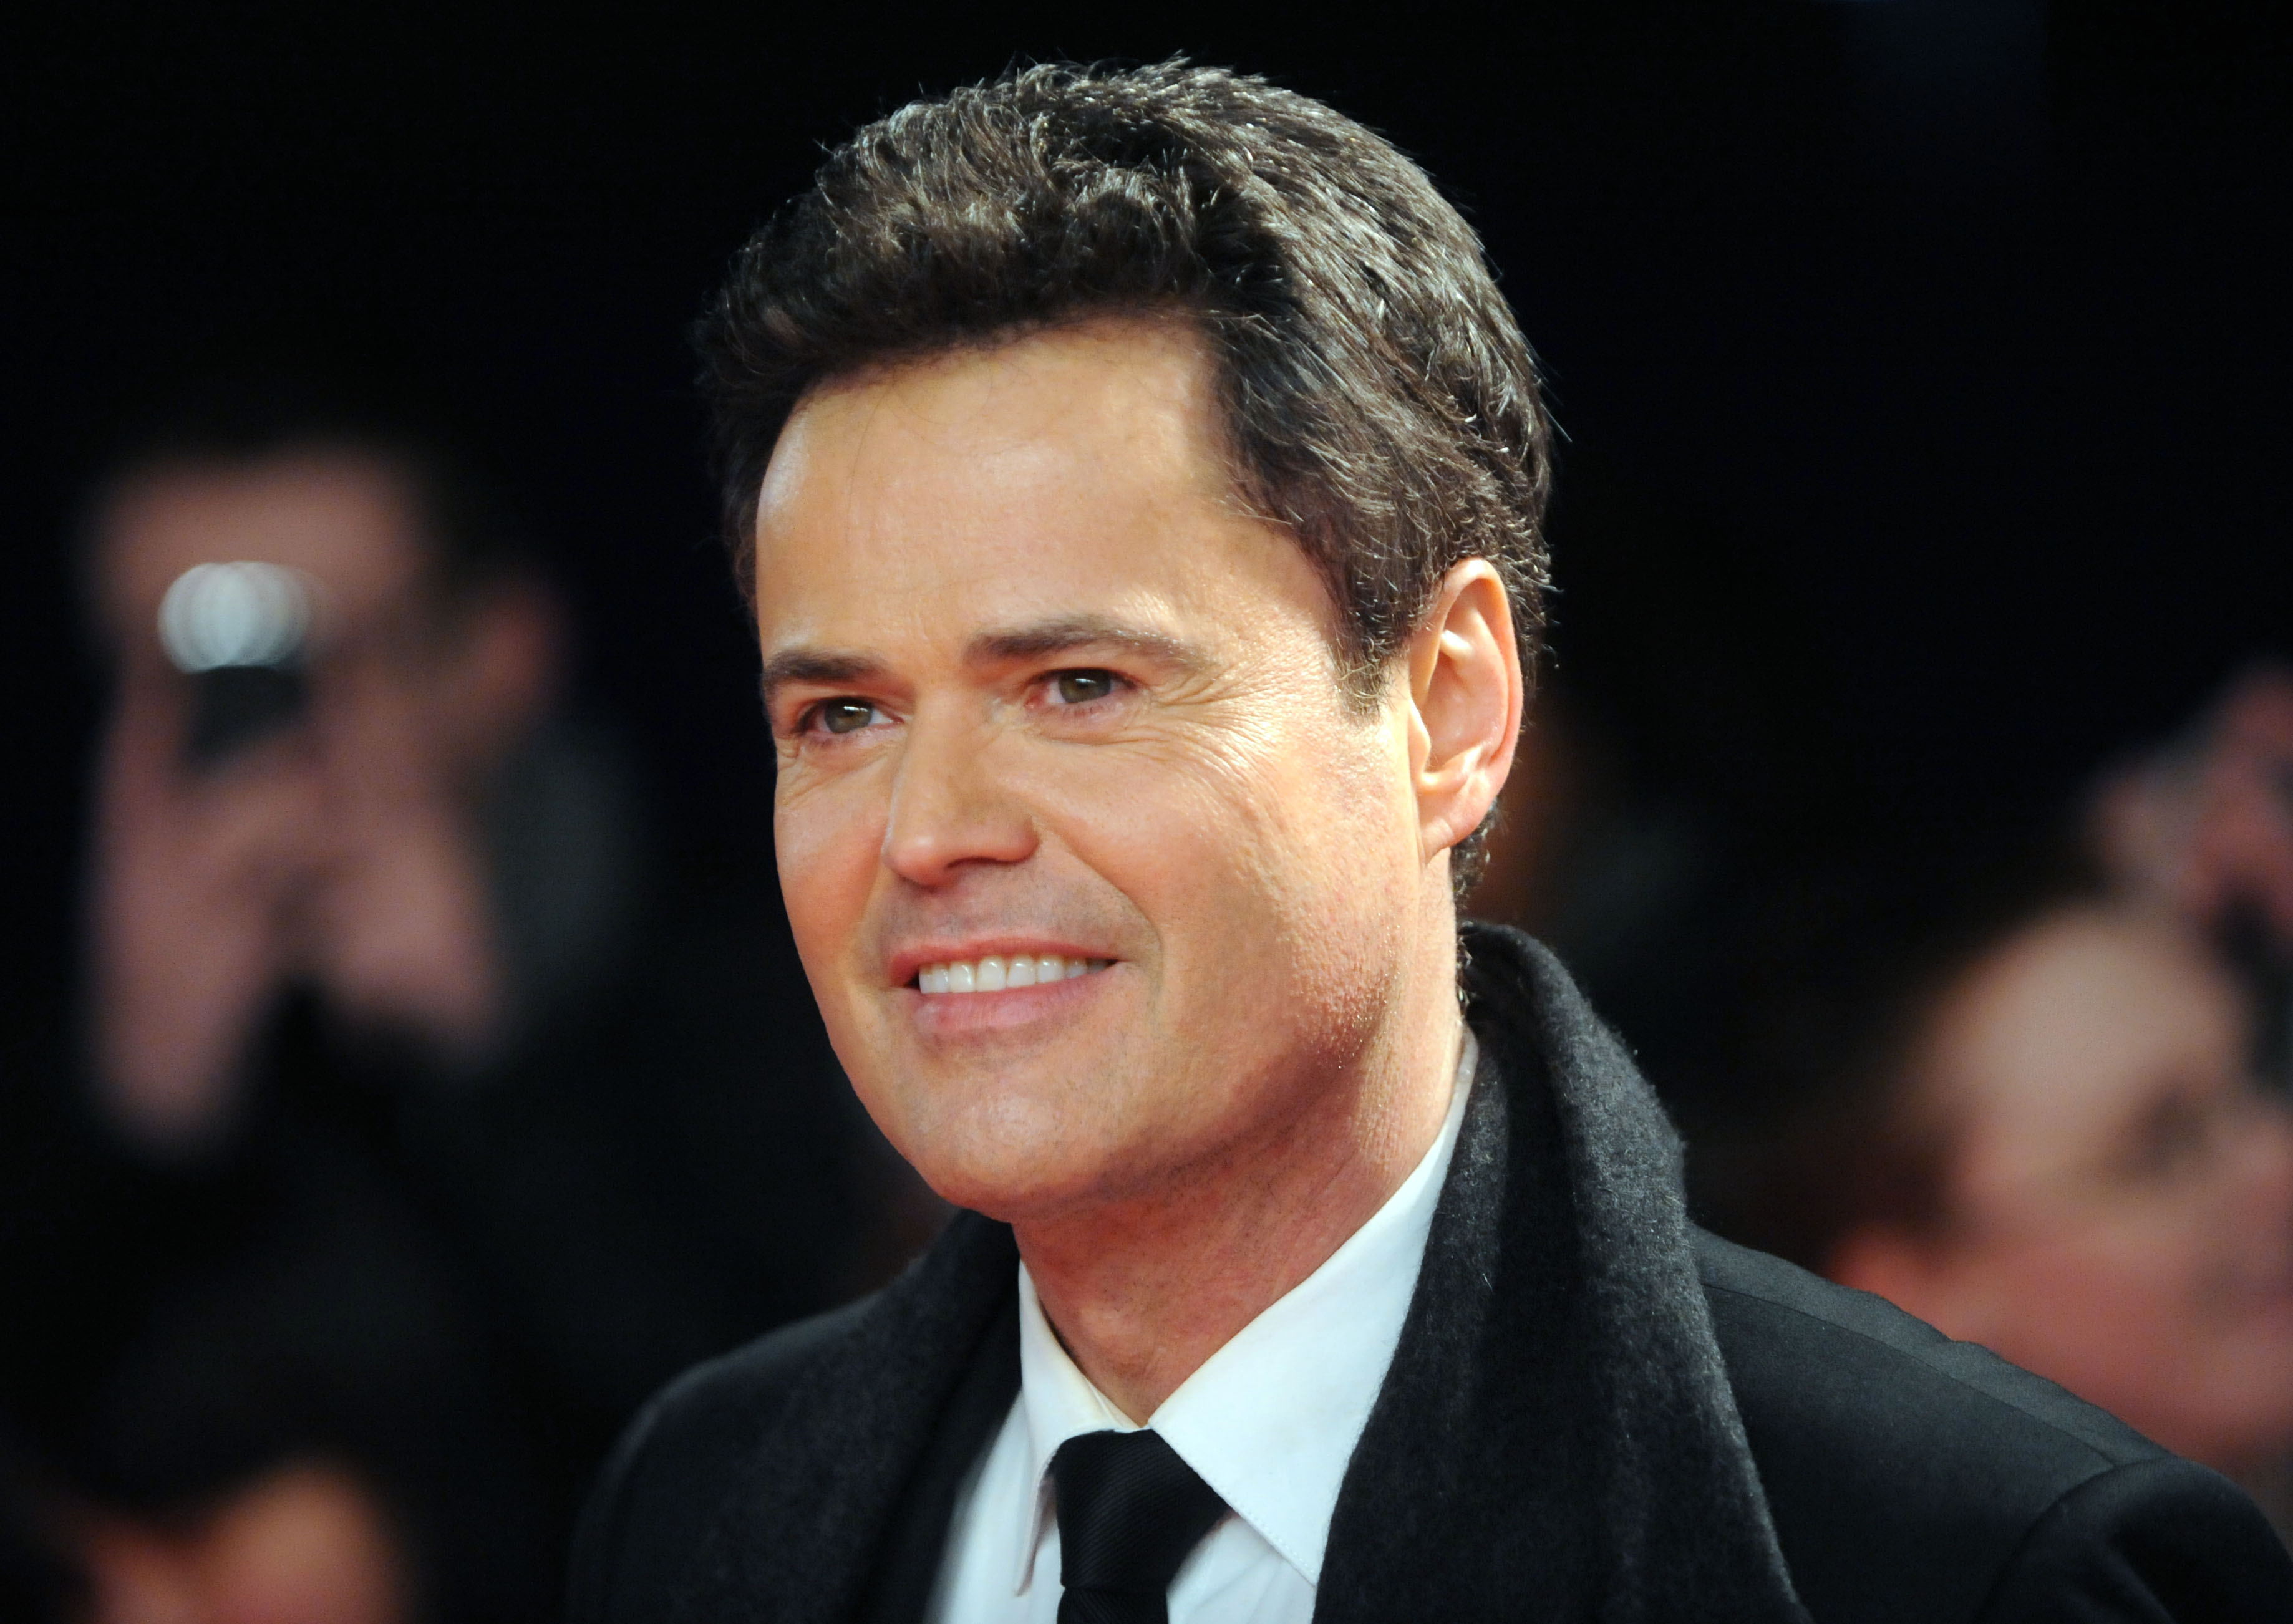 Donny Osmond in London, England on January 23, 2013. | Source: Getty Images